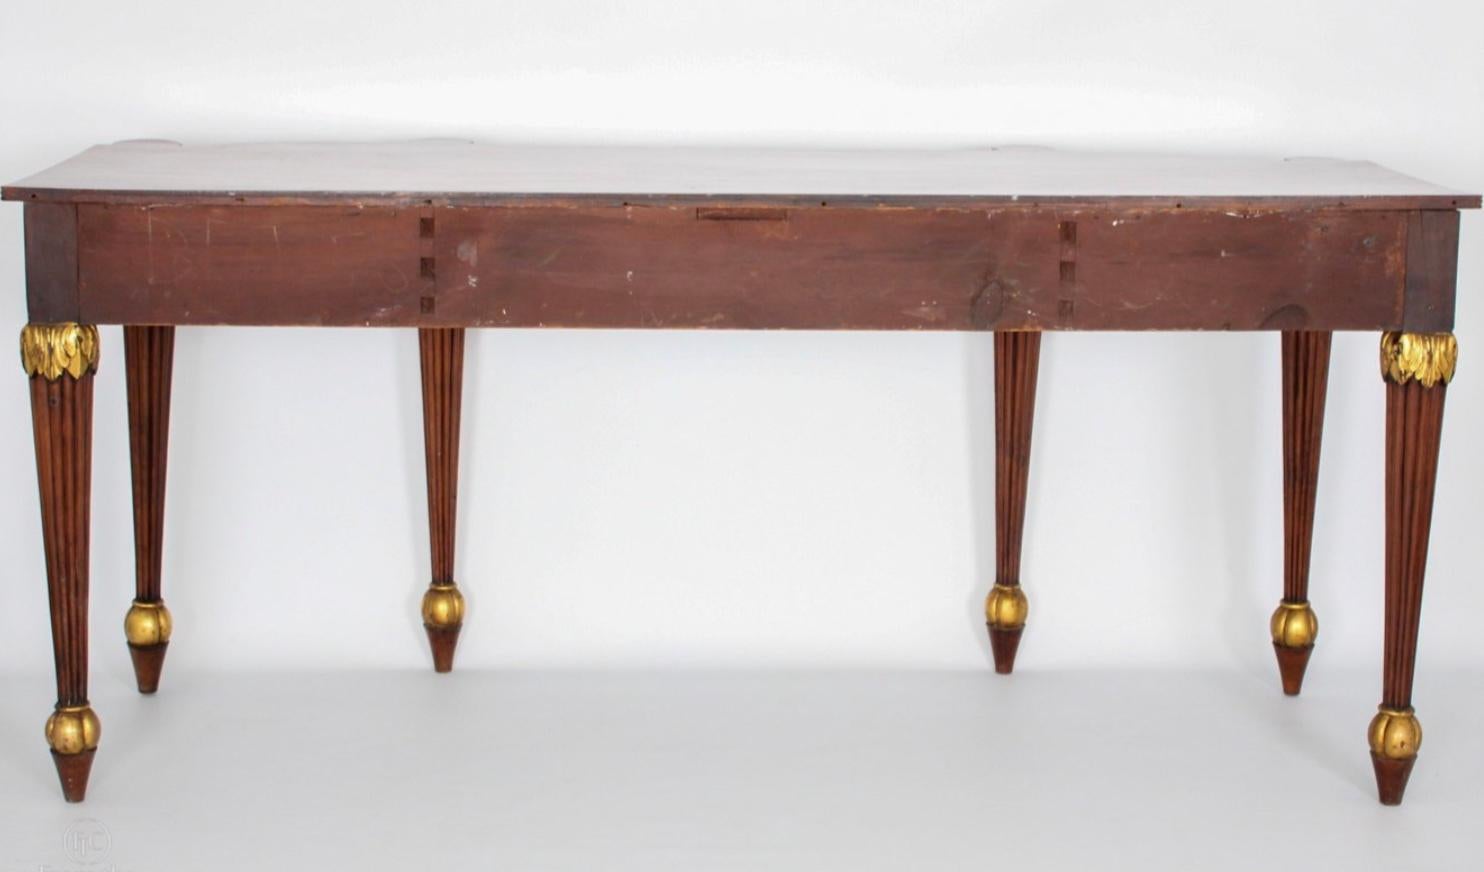 A Pair of Regency Mahogany and Parcel Gilt Serving Tables For Sale 2